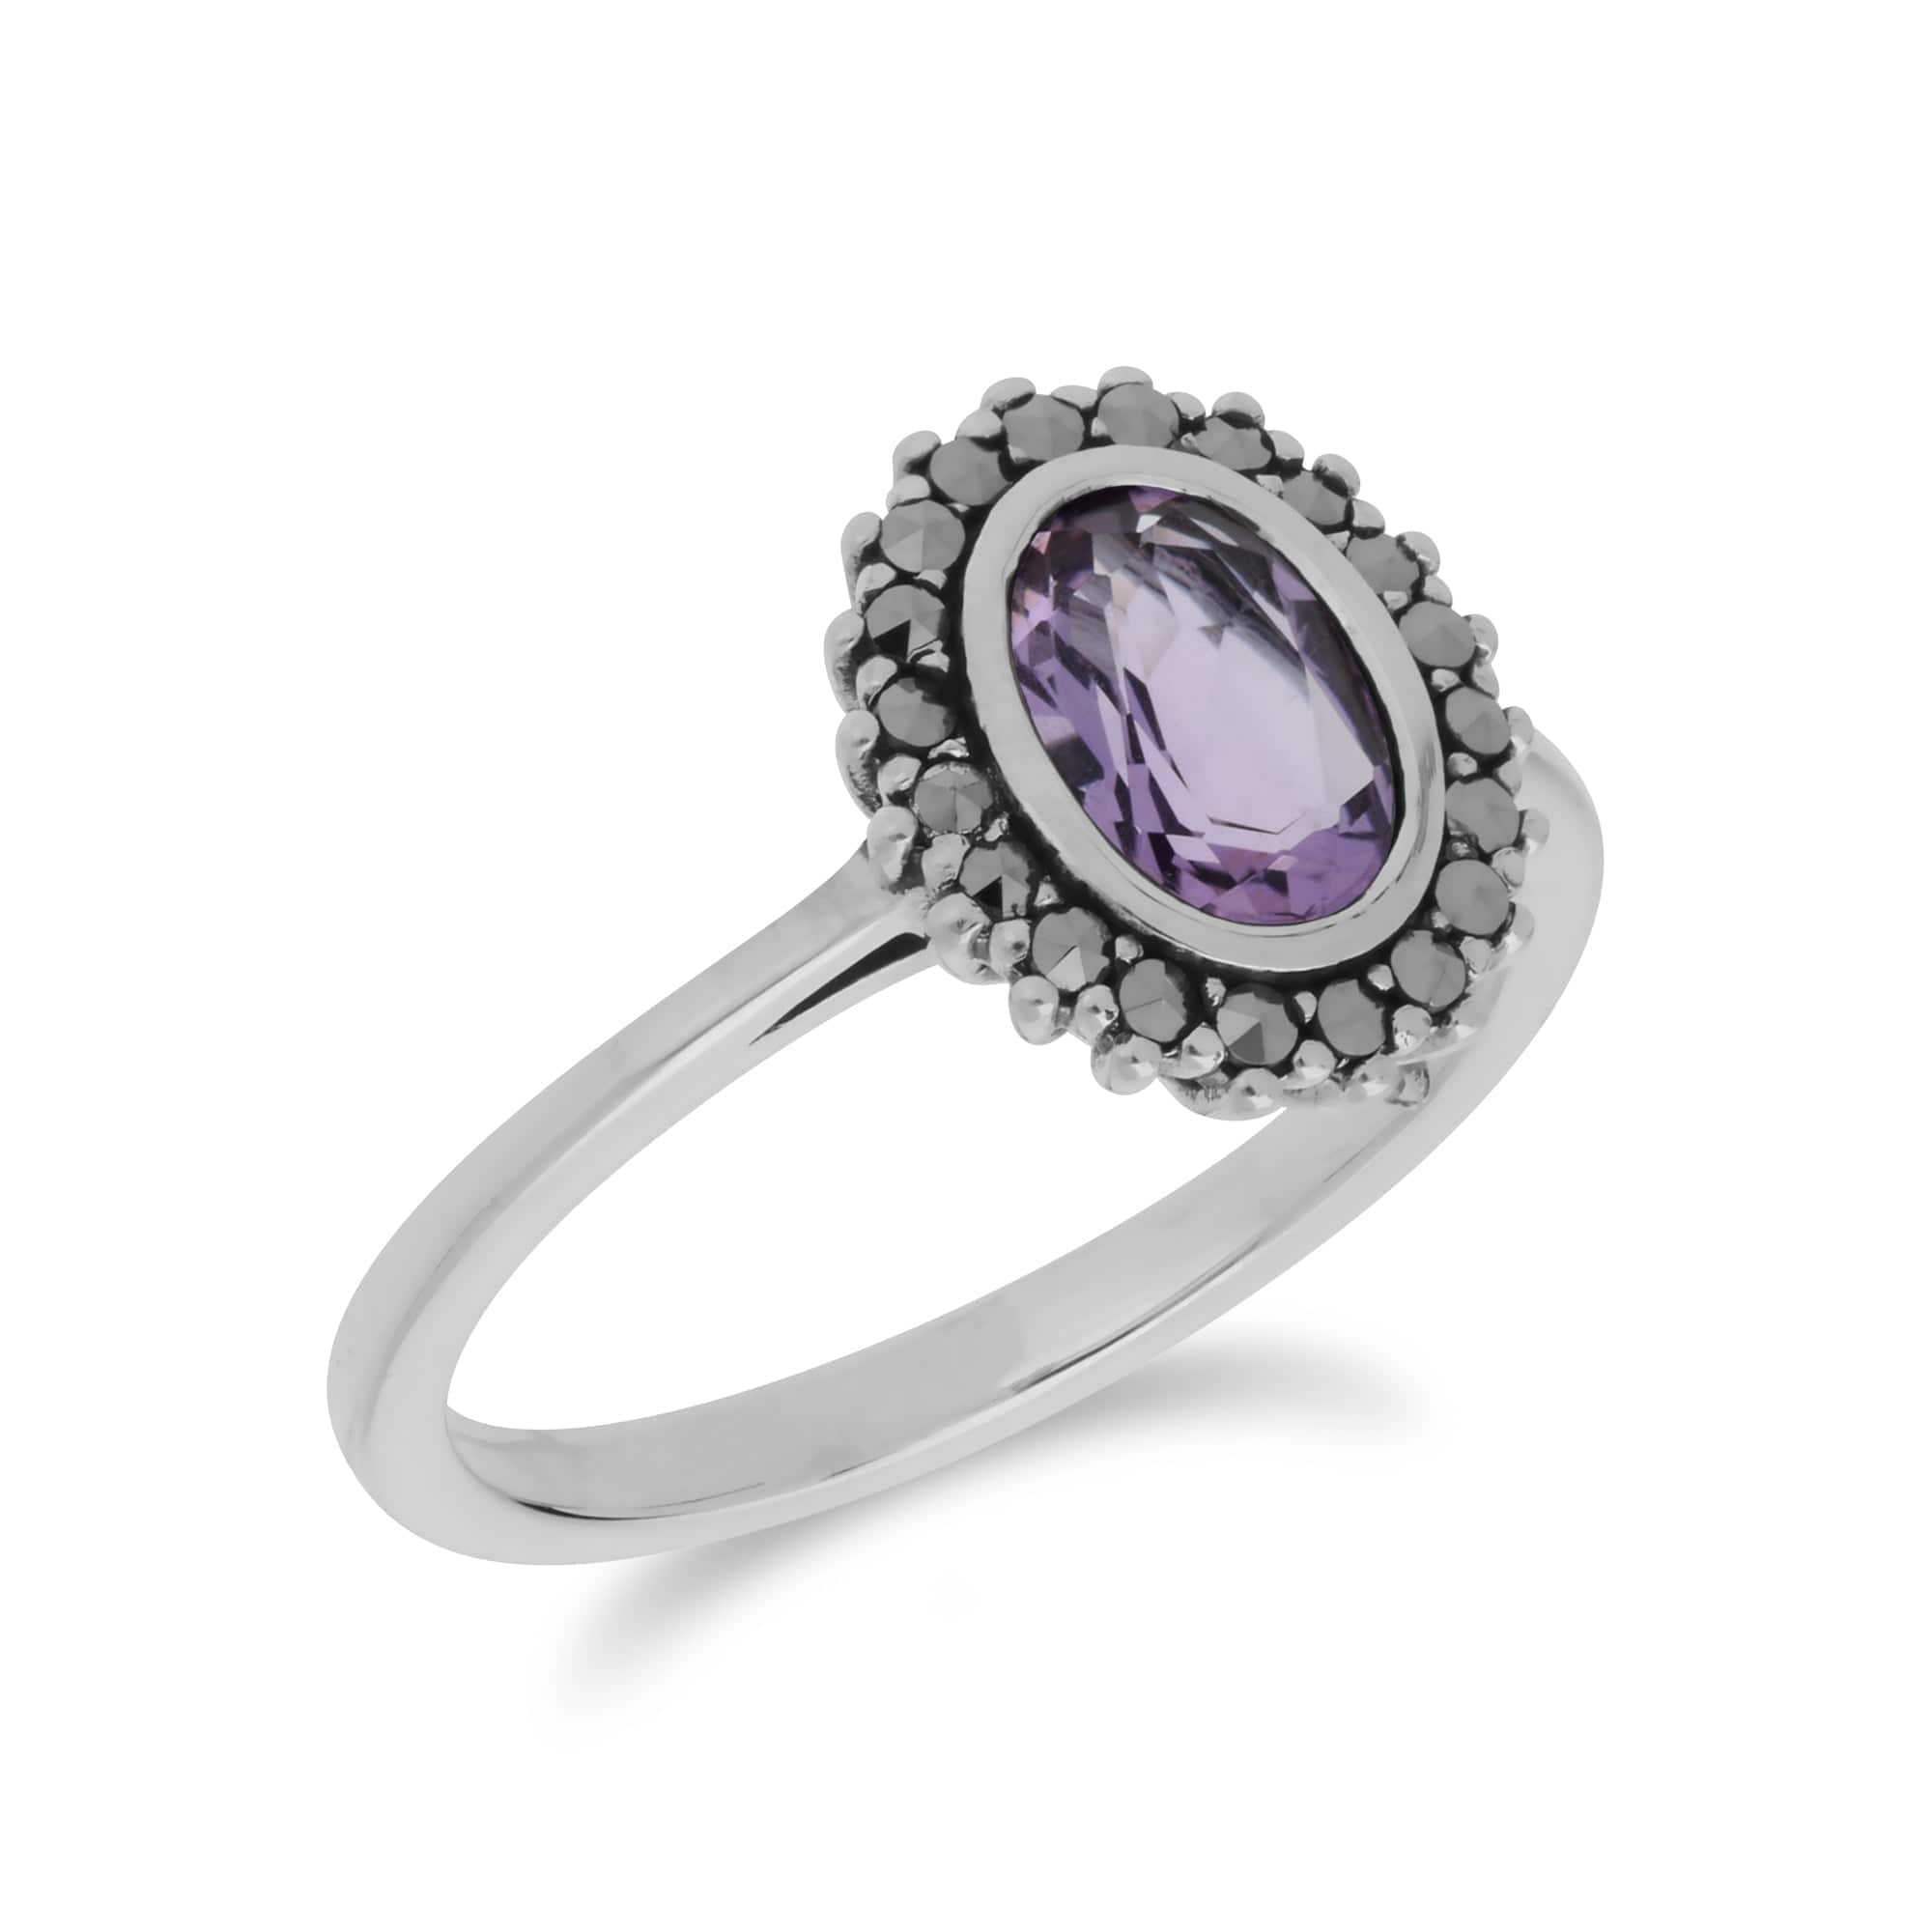 214R599702925 Art Deco Style Oval Amethyst & Marcasite Halo Ring in 925 Sterling Silver 2